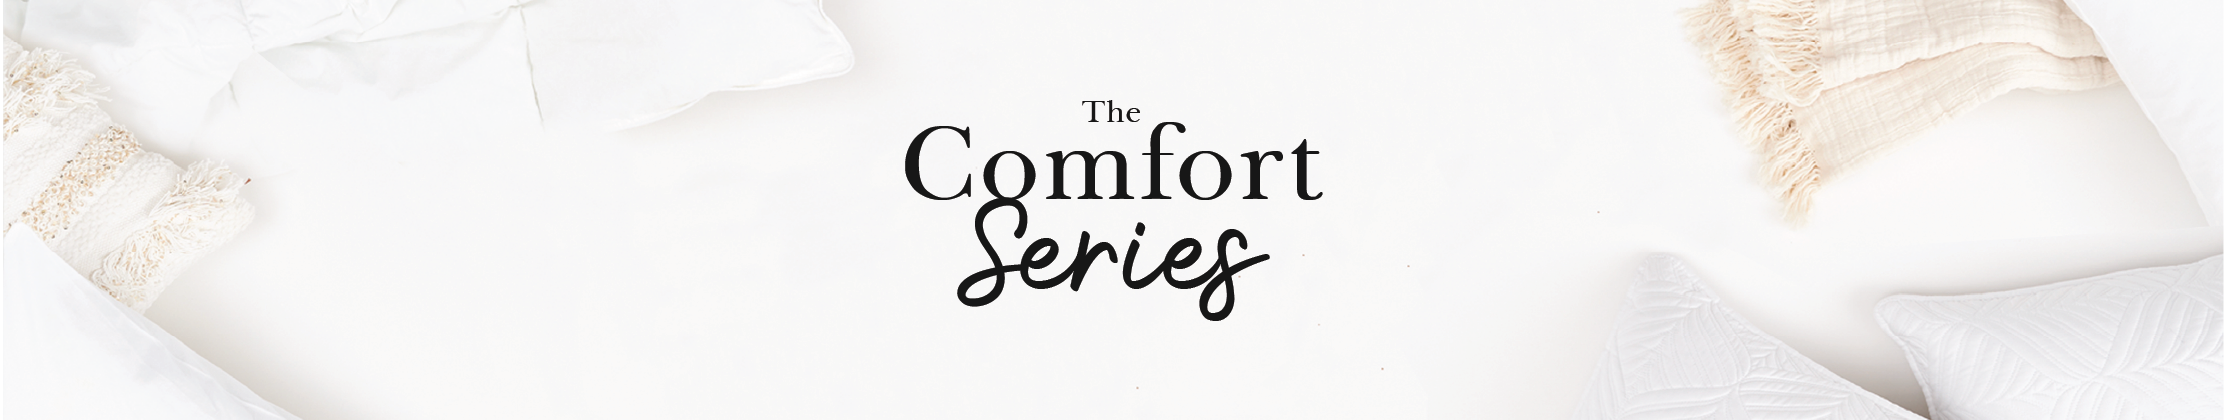 The Comfort Series Q & A